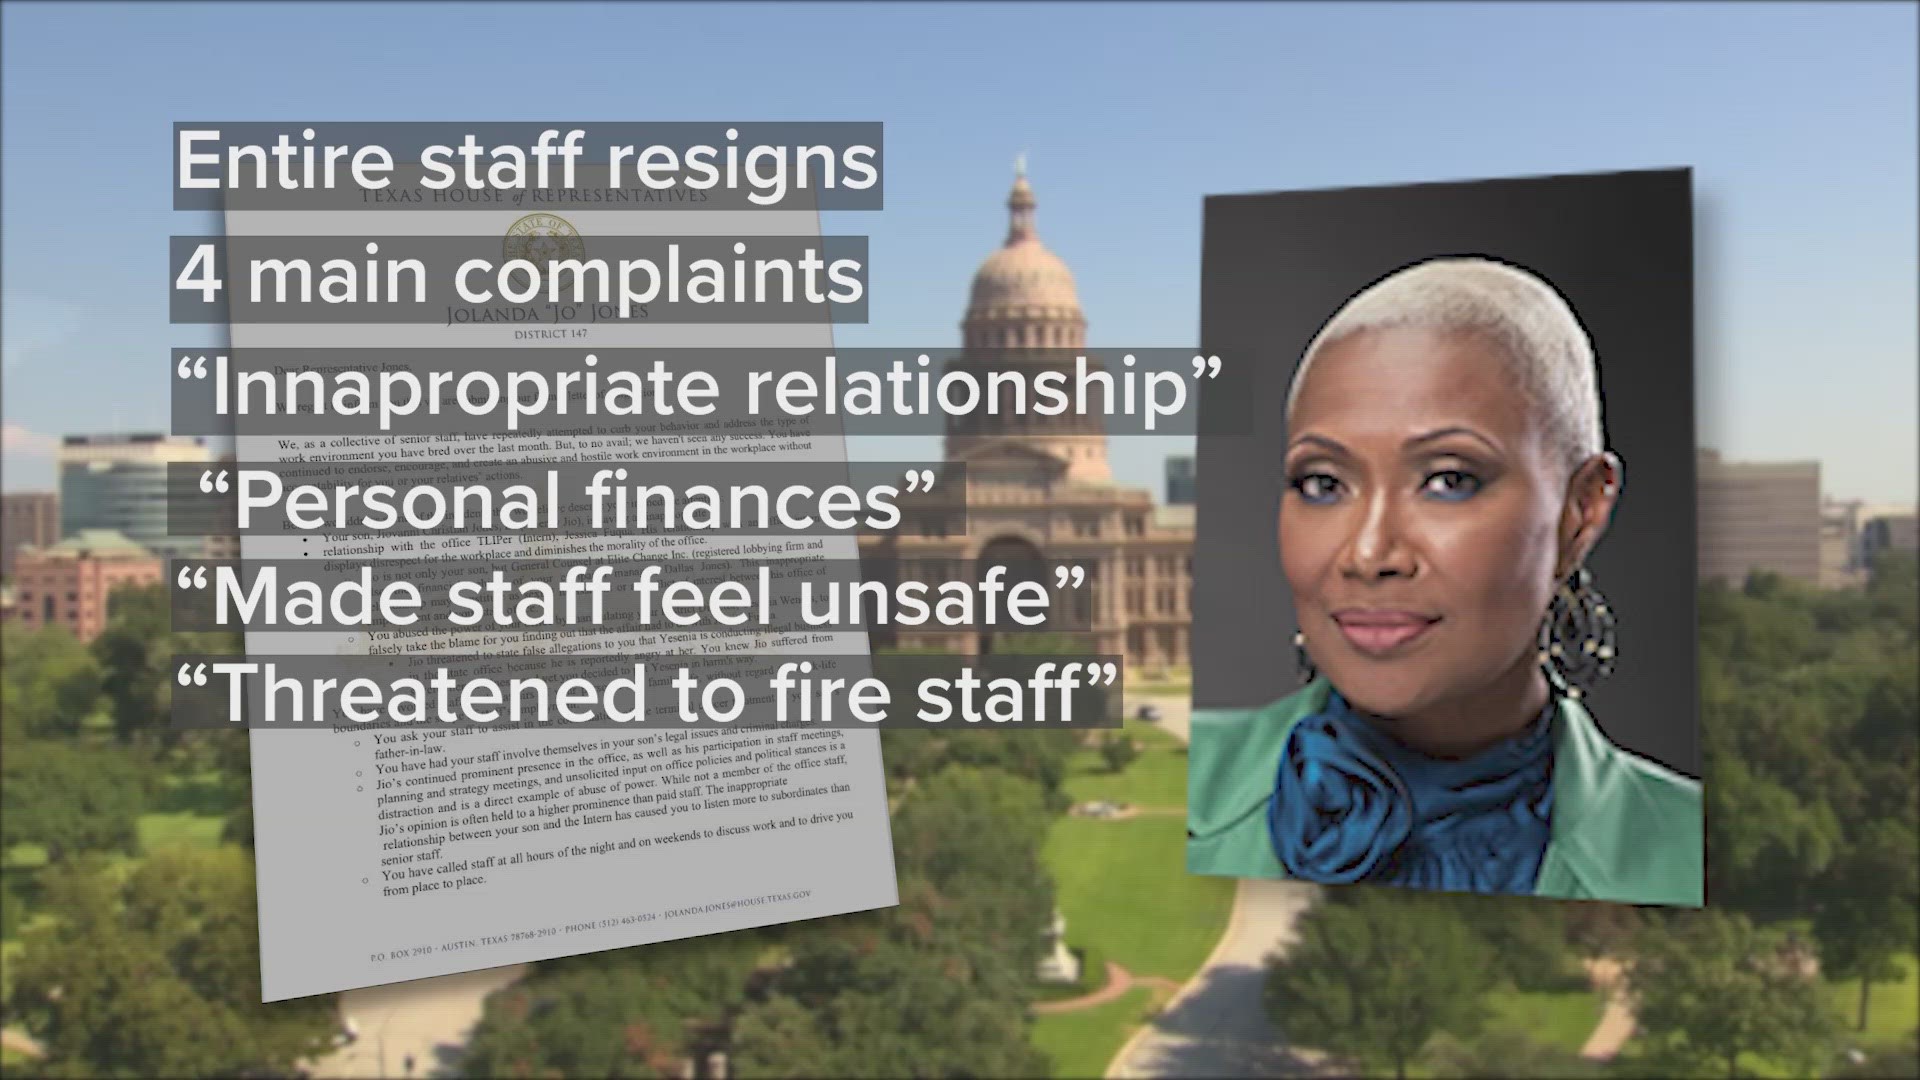 The entire staff of Houston state representative Jolanda Jones has resigned, according to a resignation letter that was leaked on social media Thursday.